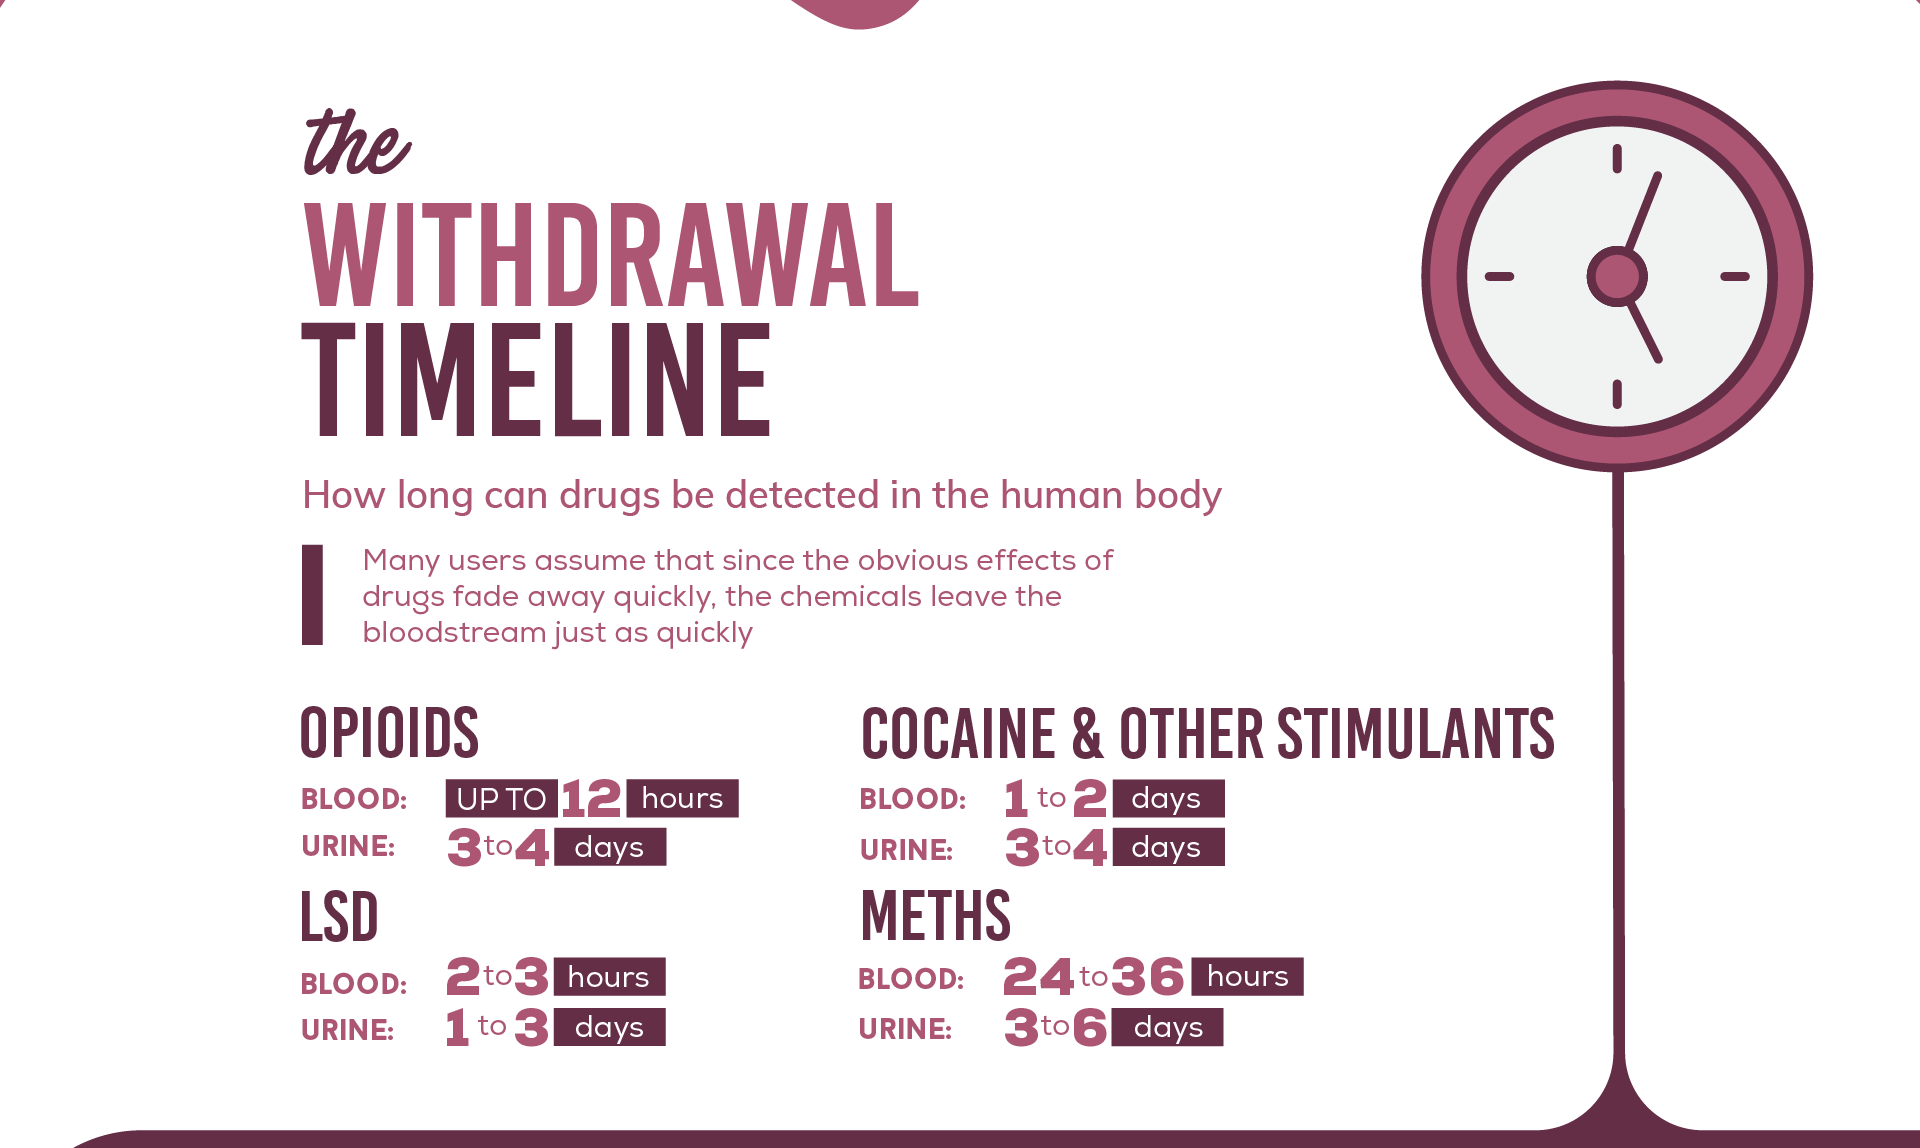 Many users assume that since the obvious effects of drugs fade away quickly, the chemicals leave the bloodstream just as quickly. Opiods can be detected in blood up to 12 hours after consume, and in urine can be detected from 3 to 4 days after consume it. Cocaine and other stimulants can be detected in blood from 1 to 2 days after consume and in urine from 3 to 4 days after consume it. LSD can be detected in blood from 2 to 3 hours fter consume and in urine from 1 to 3 days after consume it. METHS can be detected in blood from 24 to 36 hours after consume and in urine can be detected from 3 to 6 days after consume it.